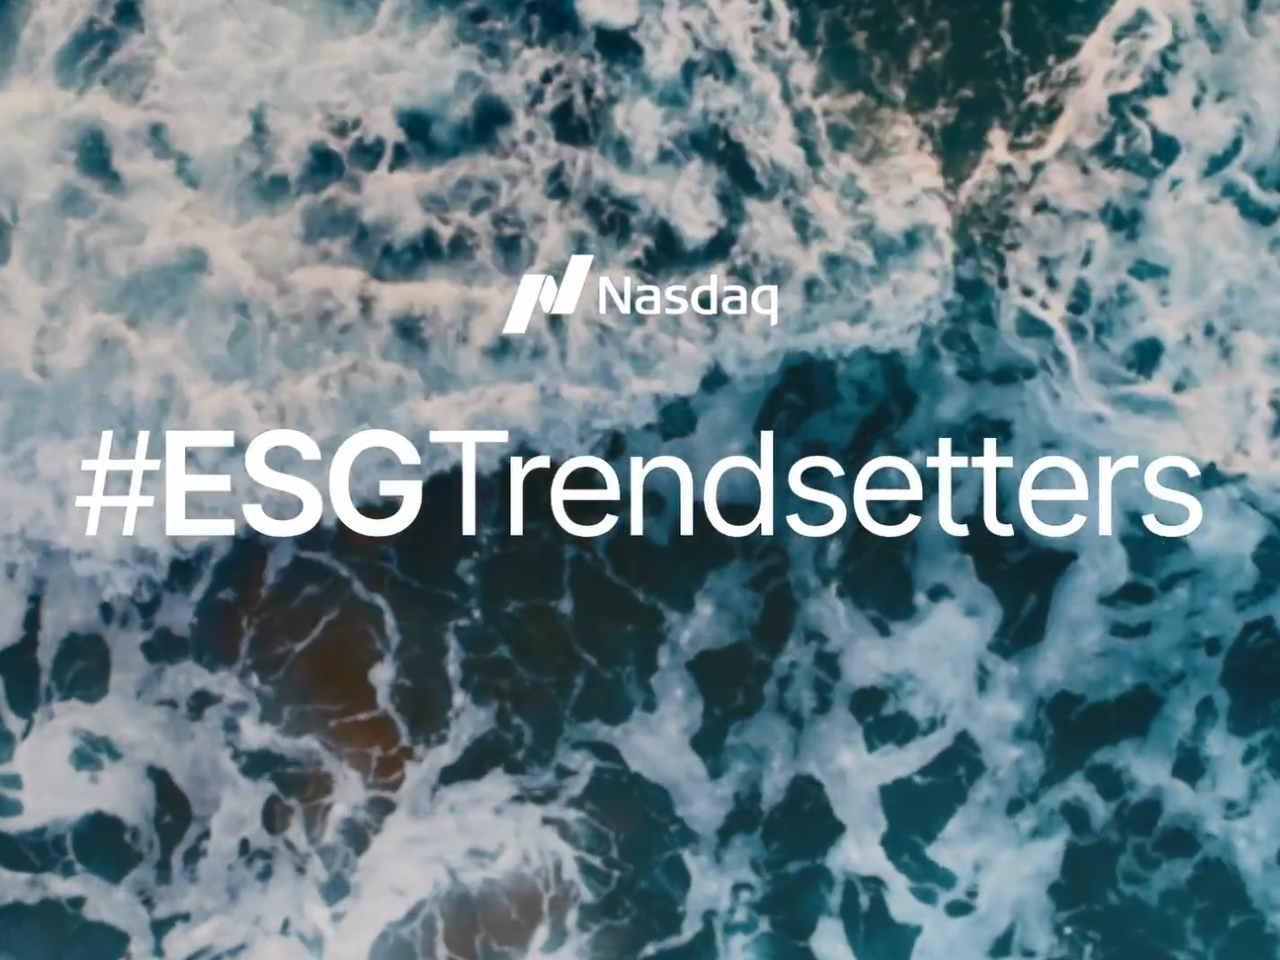 Nasdaq logo and ESG Trendsetters over a background of crashing waves.